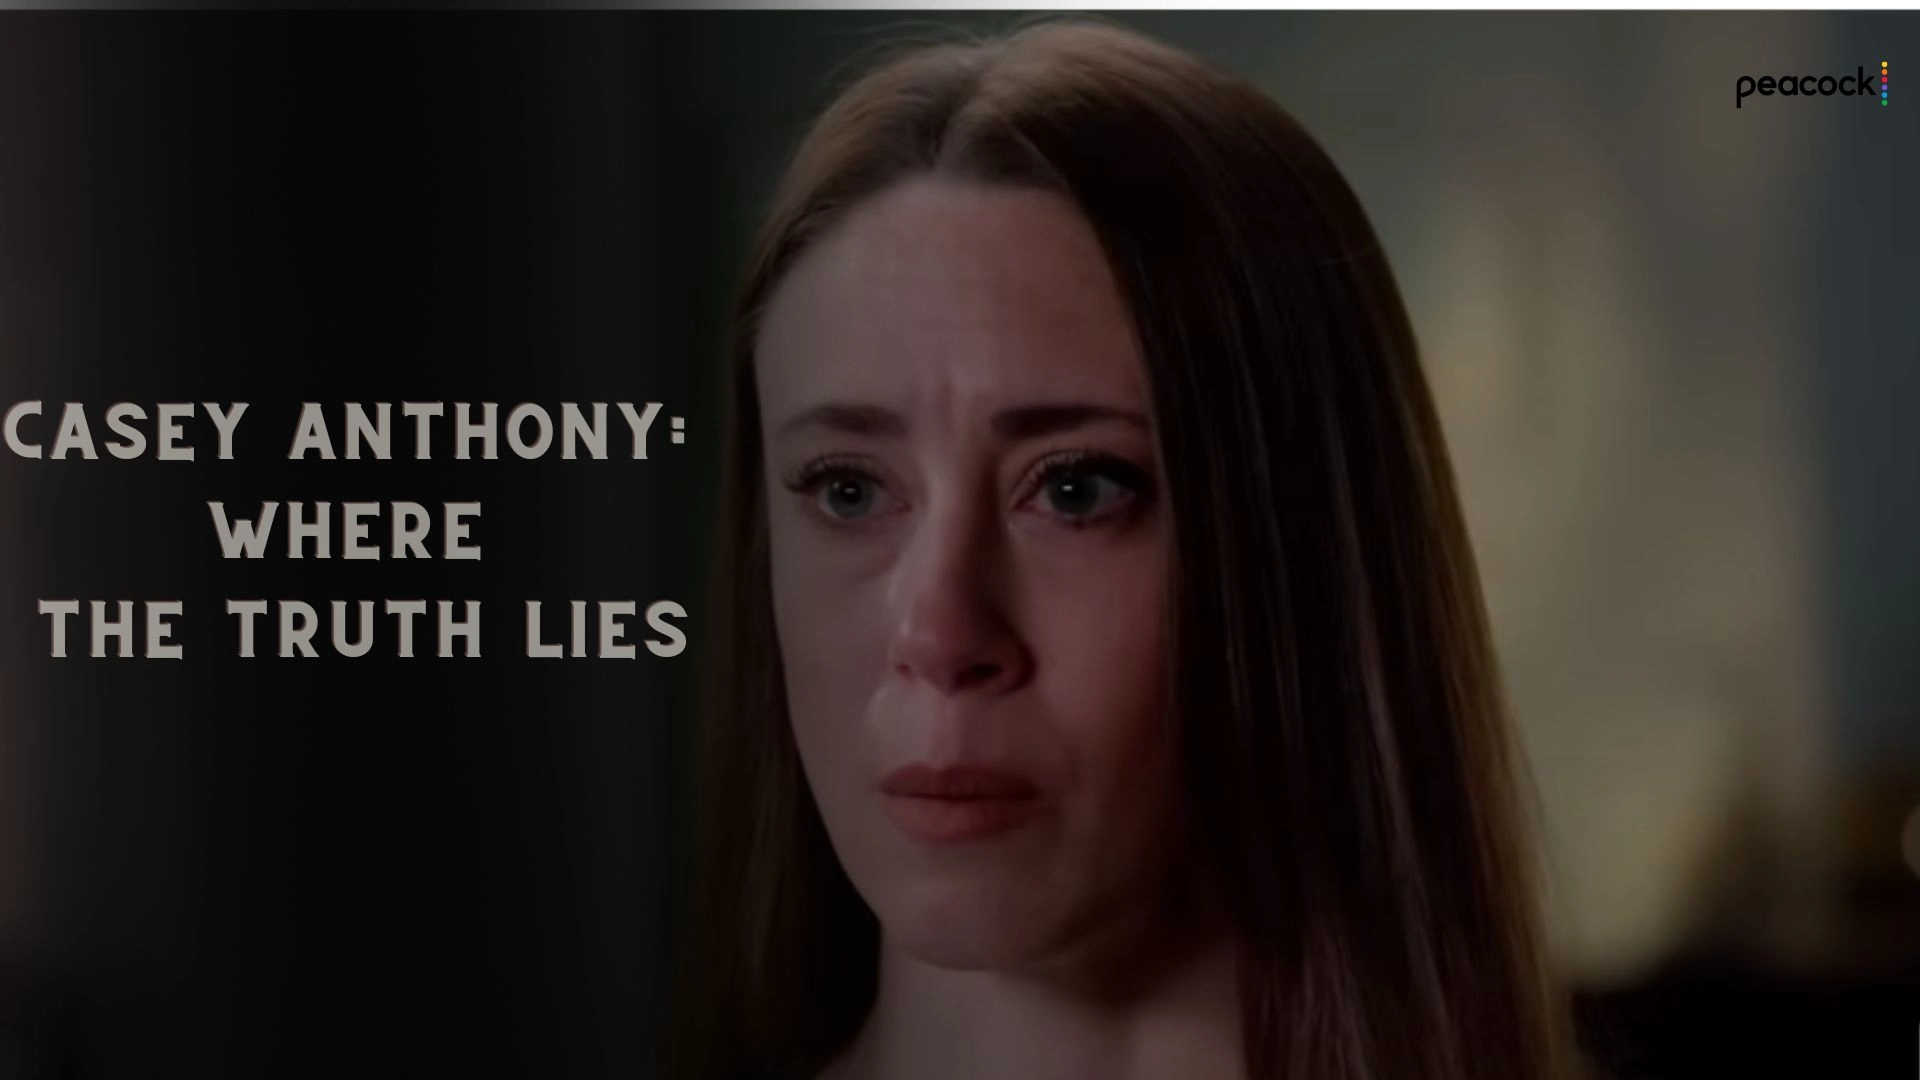 Casey Anthony: Where the Truth Lies Parents Guide (2022)